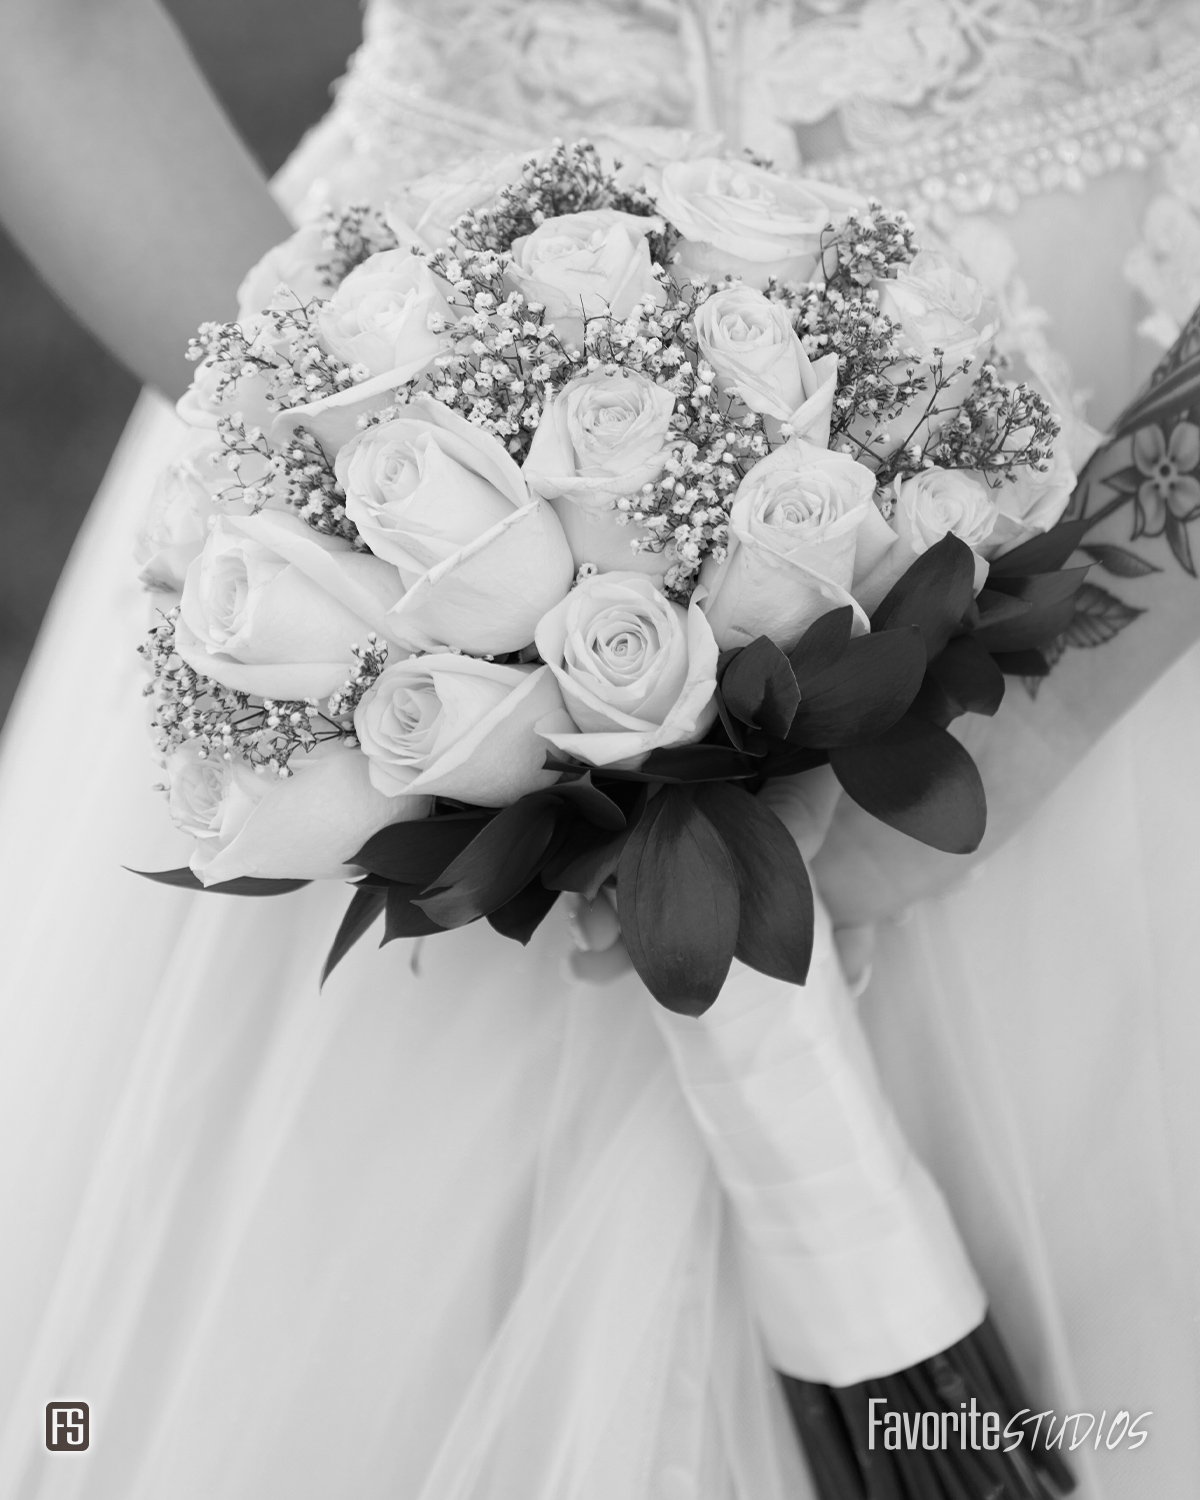 Black and White Bridal Bouquet